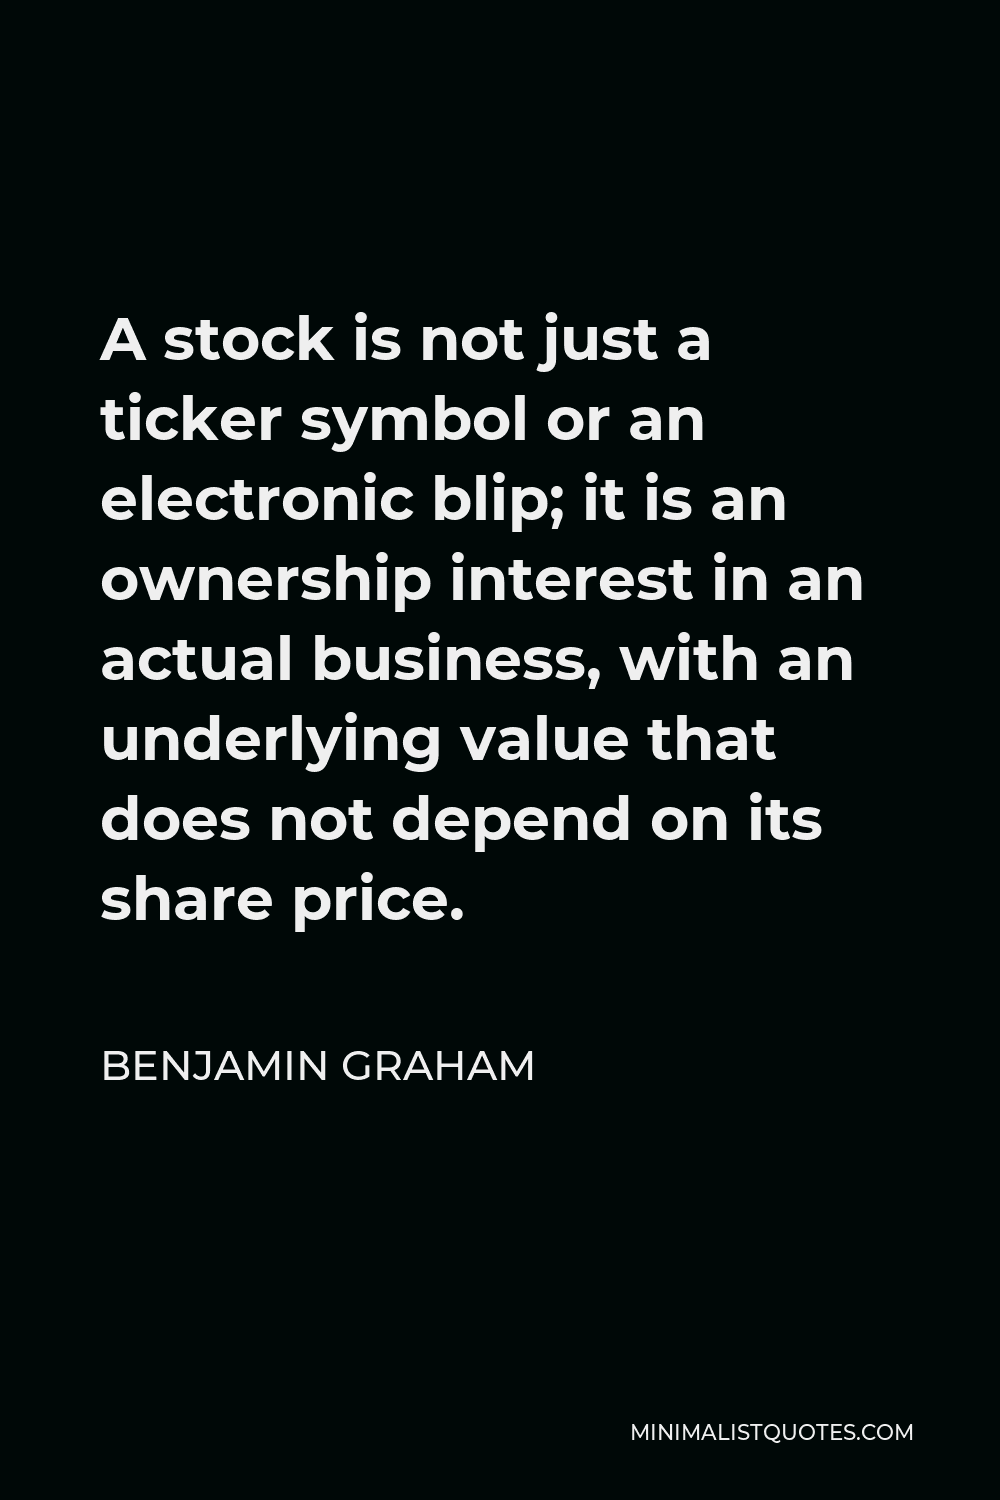 Benjamin Graham Quote - A stock is not just a ticker symbol or an electronic blip; it is an ownership interest in an actual business, with an underlying value that does not depend on its share price.